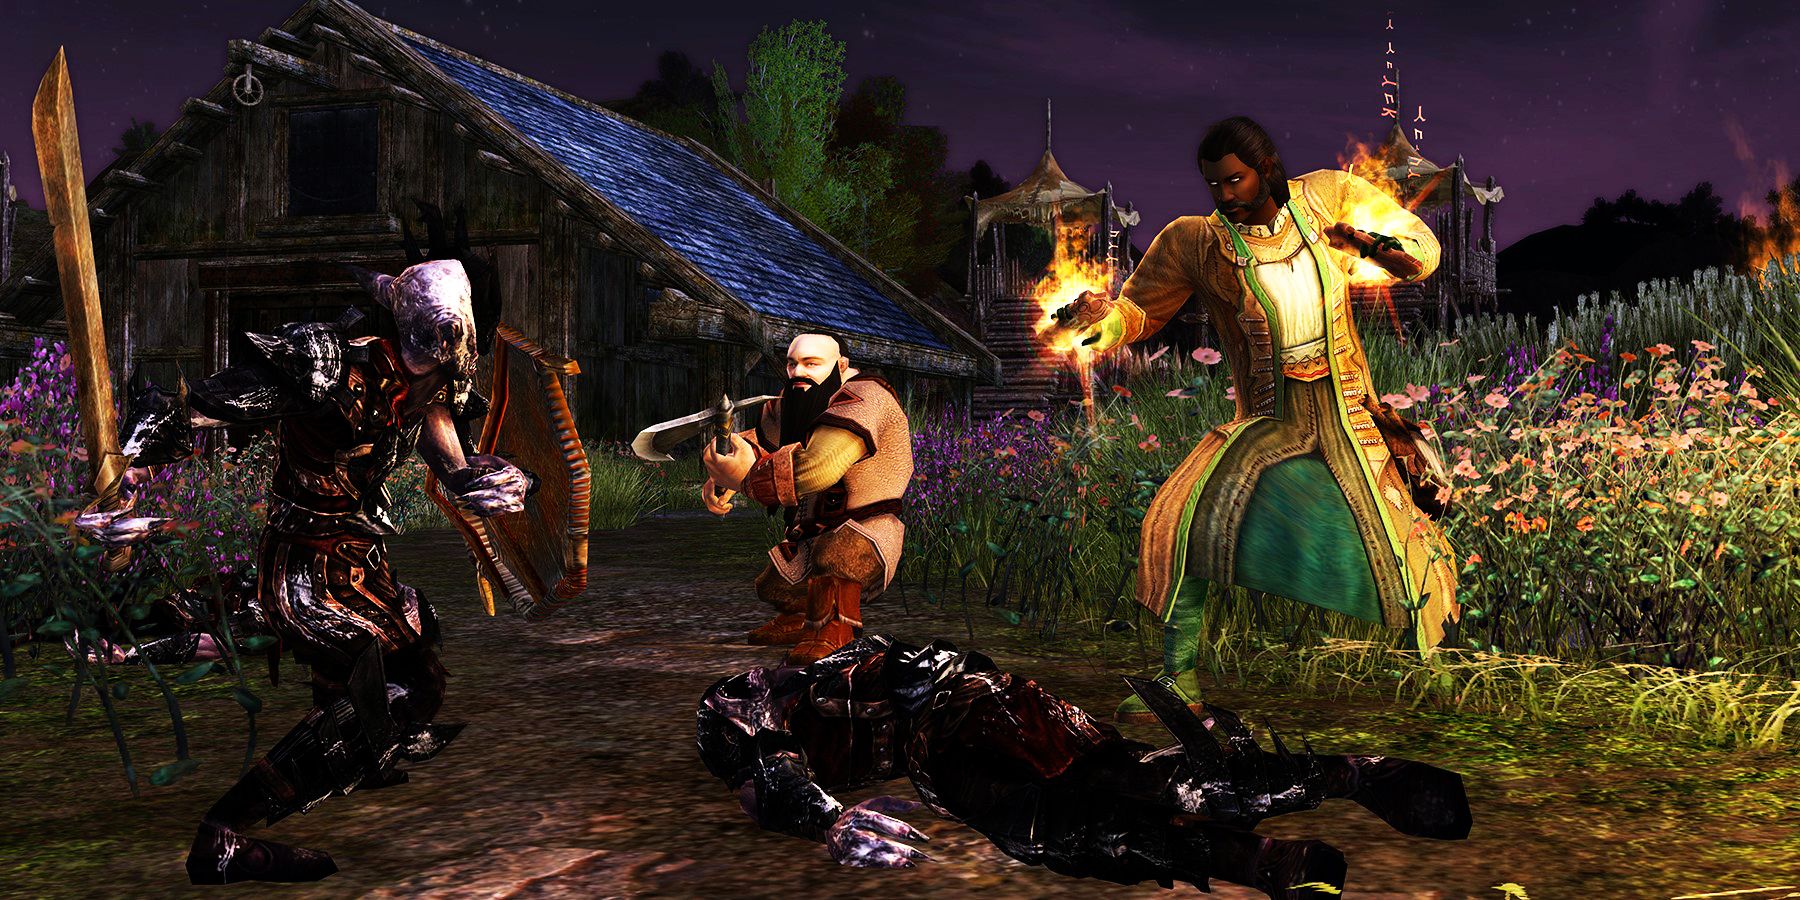 Two players in Lord of the Rings Online - one a Dwarven hero and the other a mage - fight a goblin in a farm-like settlement.